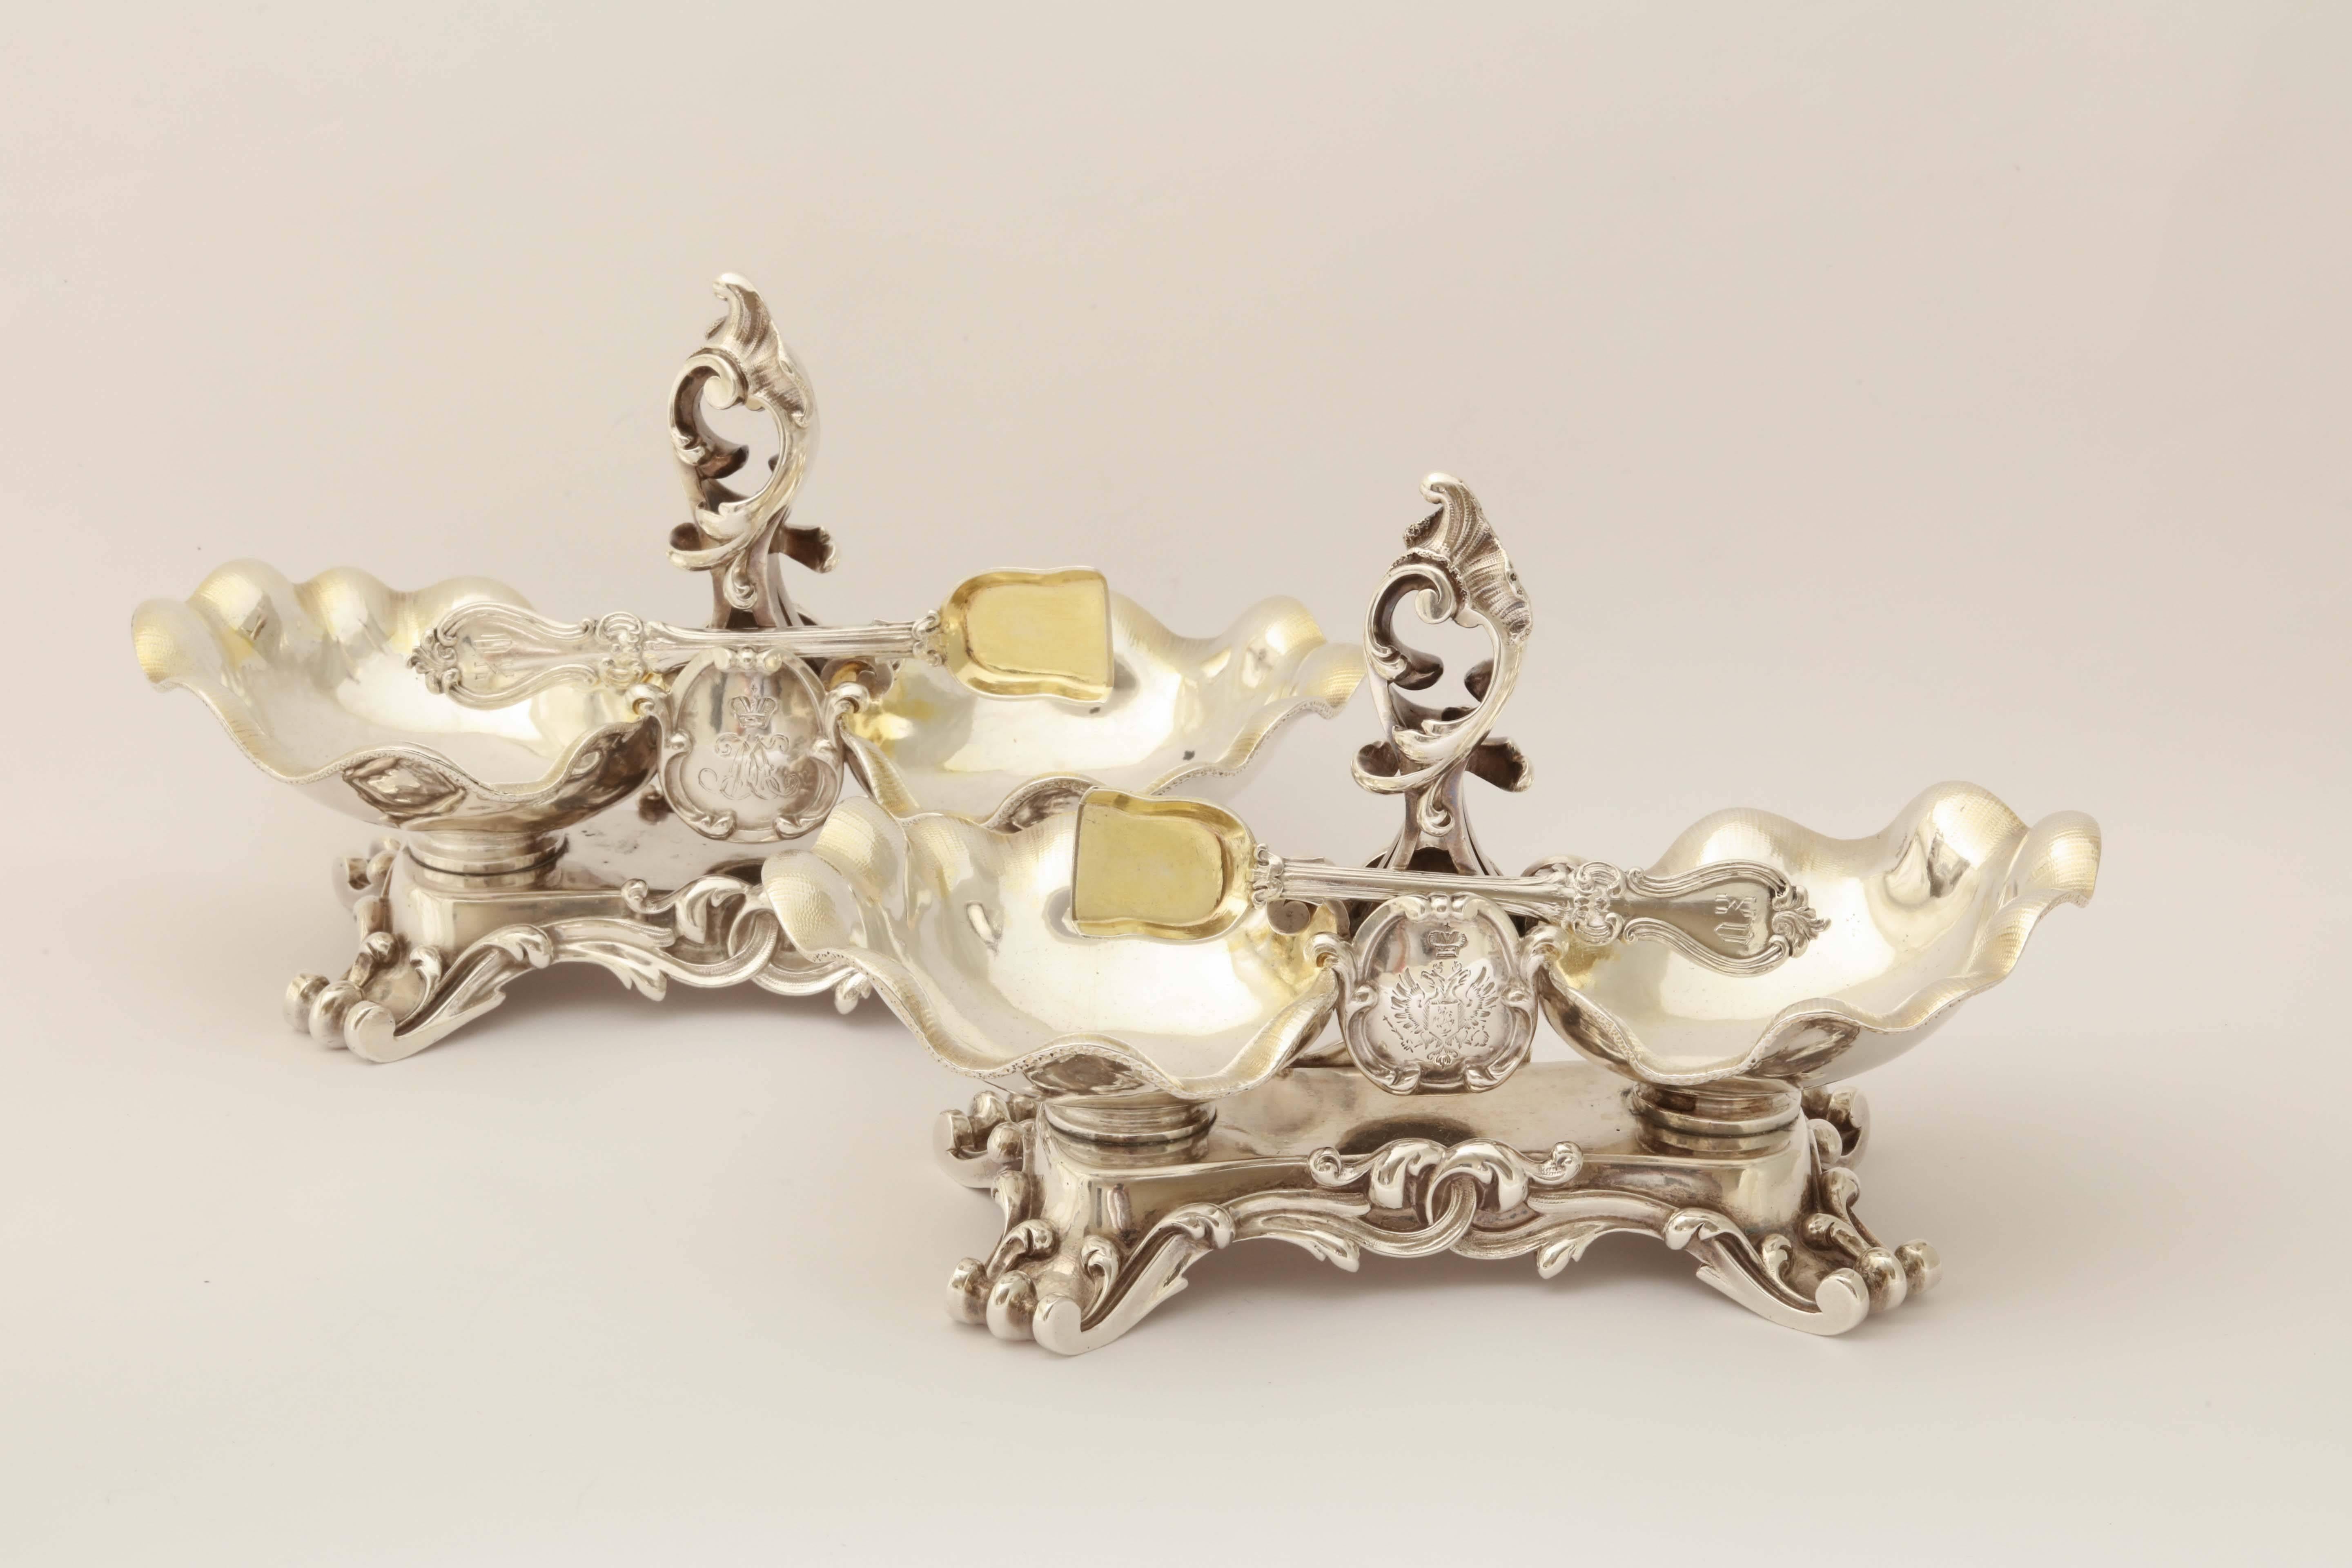 A pair of double salts in the rococo style from the wedding service of Grand Duke Michael Nikolaevich (1832-1909). The bowls are formed as shells flanking a twisted stem supporting a central cartouche engraved MN beneath the Imperial crown. The